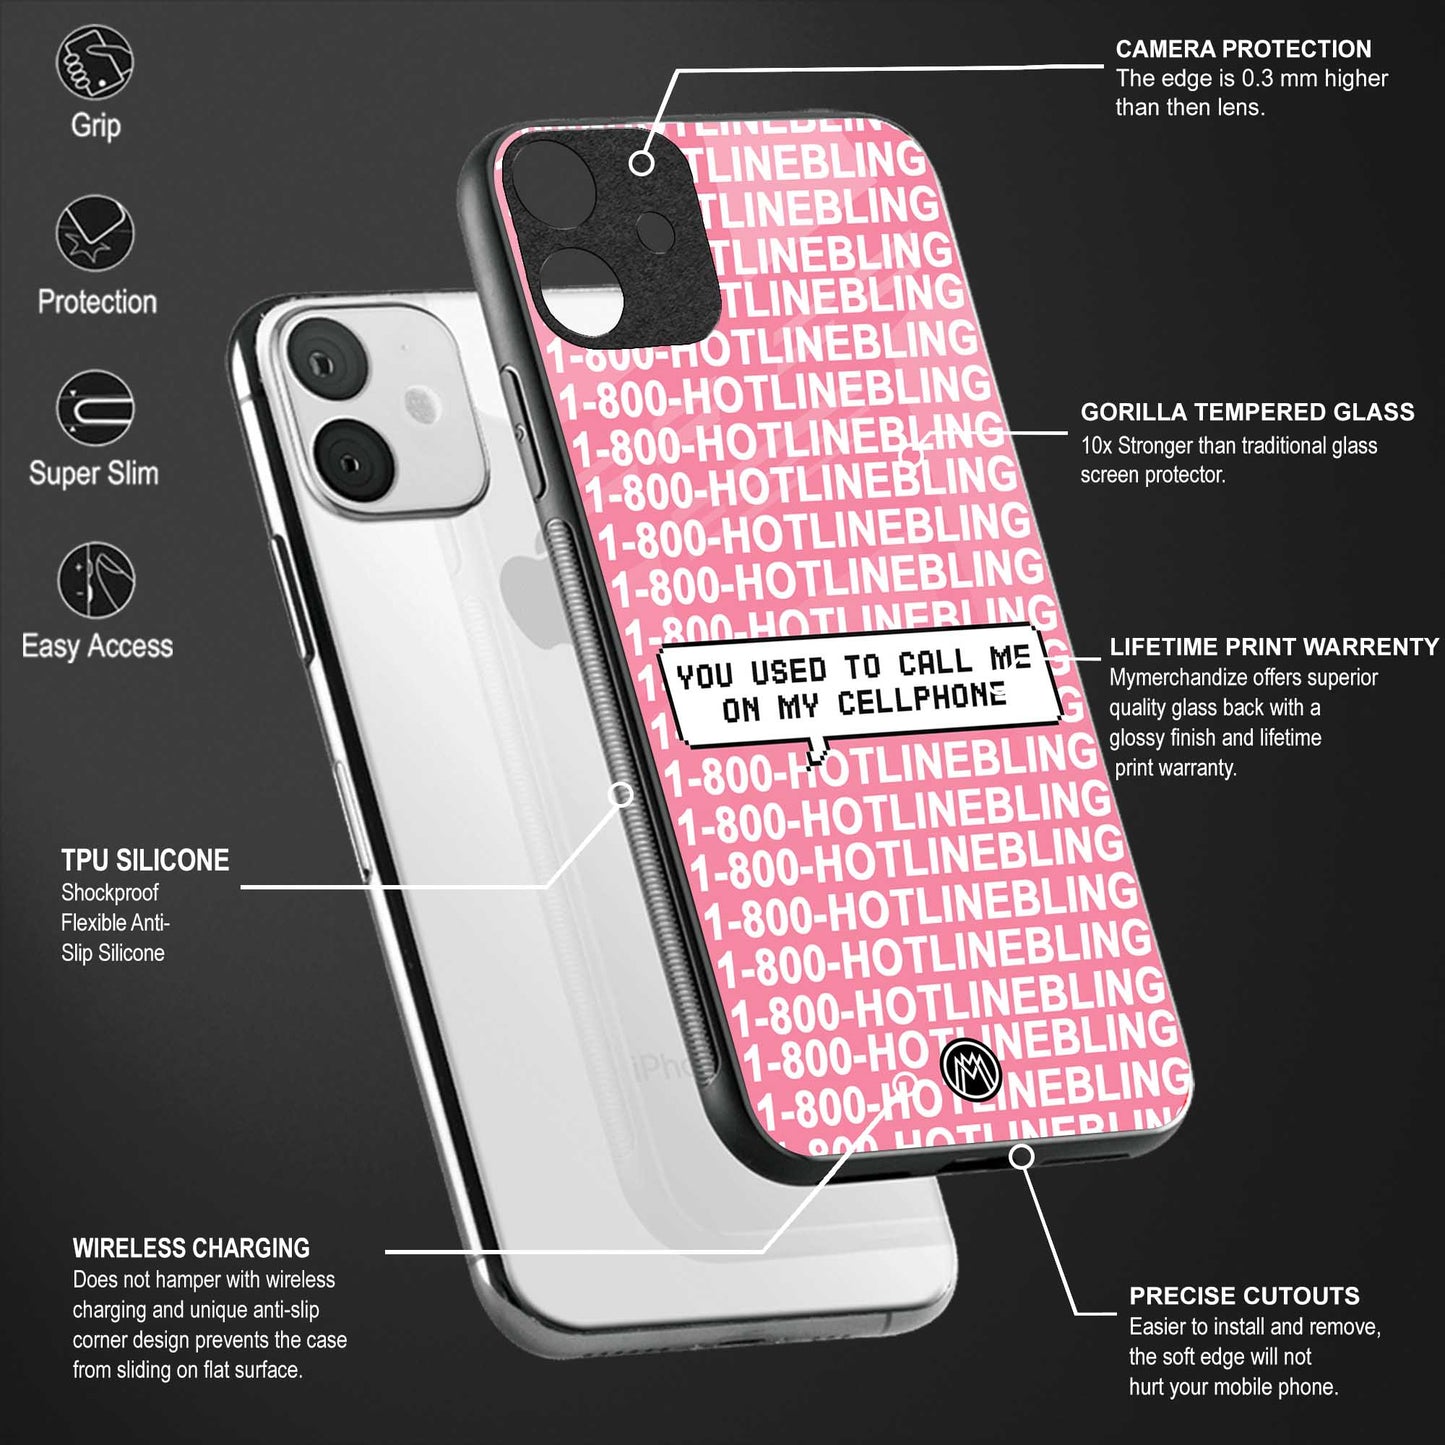 1800 hotline bling phone cover for samsung galaxy s20 ultra 